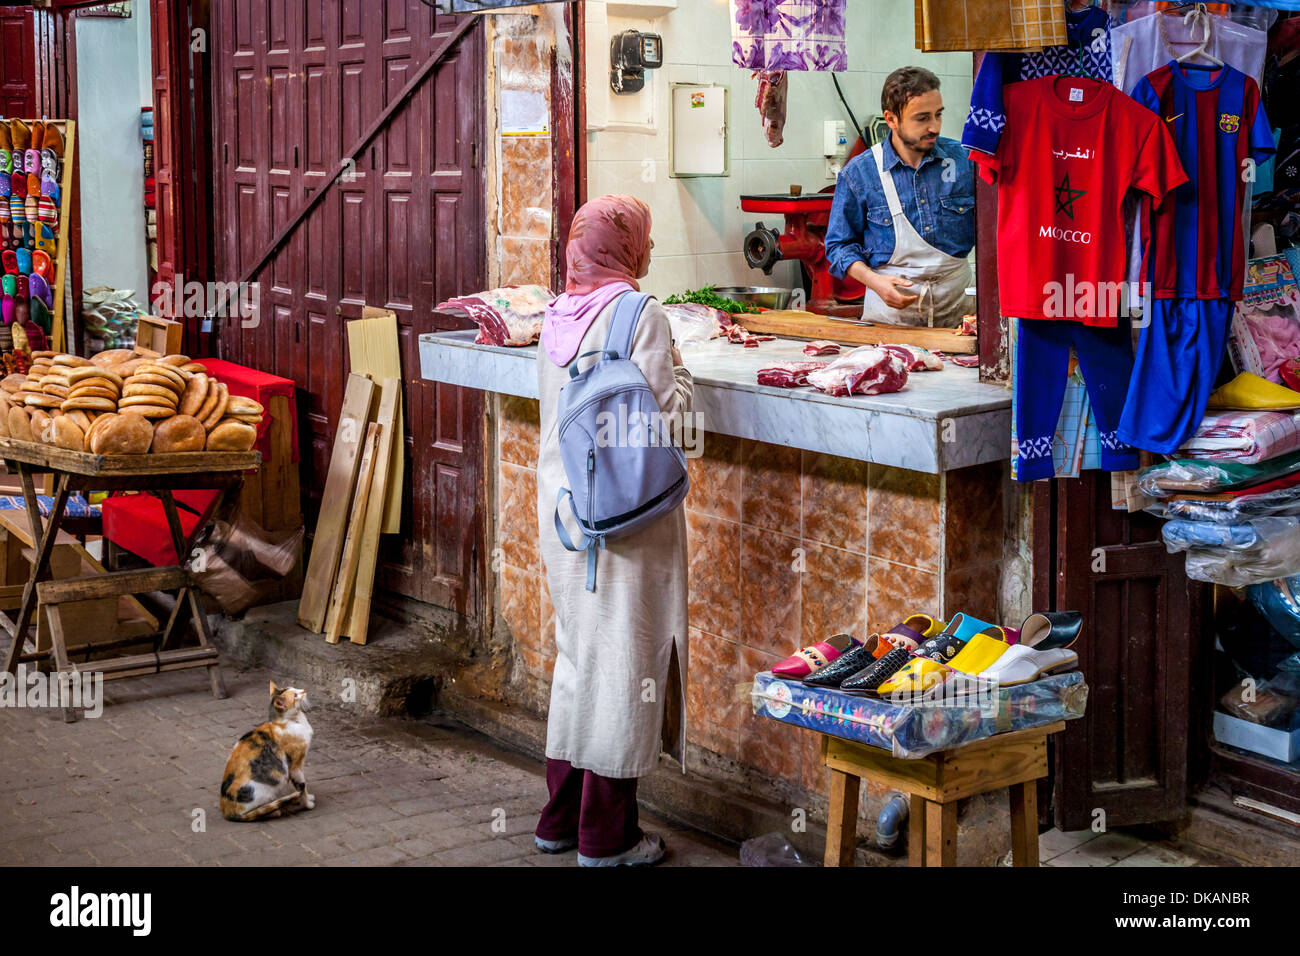 A Woman Shops For Meat In The Medina (Old City) Fez, Morocco Stock Photo